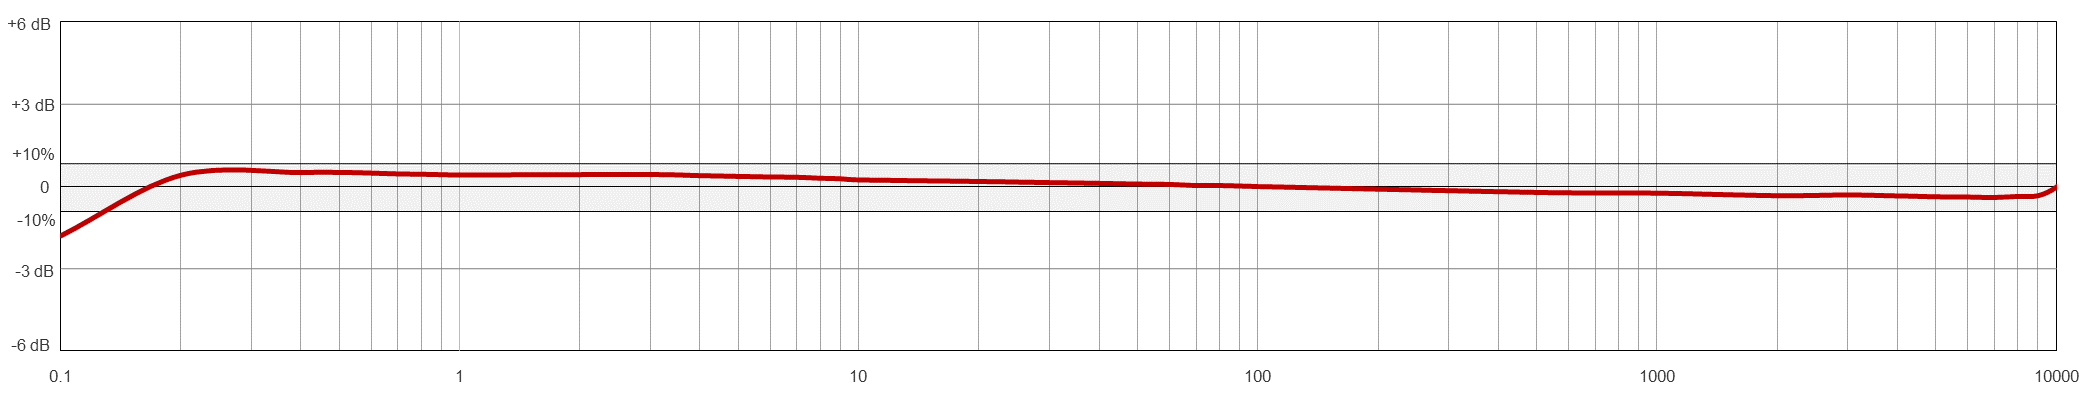 A line graph showing the frequency resopnse of a CTC AC233 condition monitoring sensor.